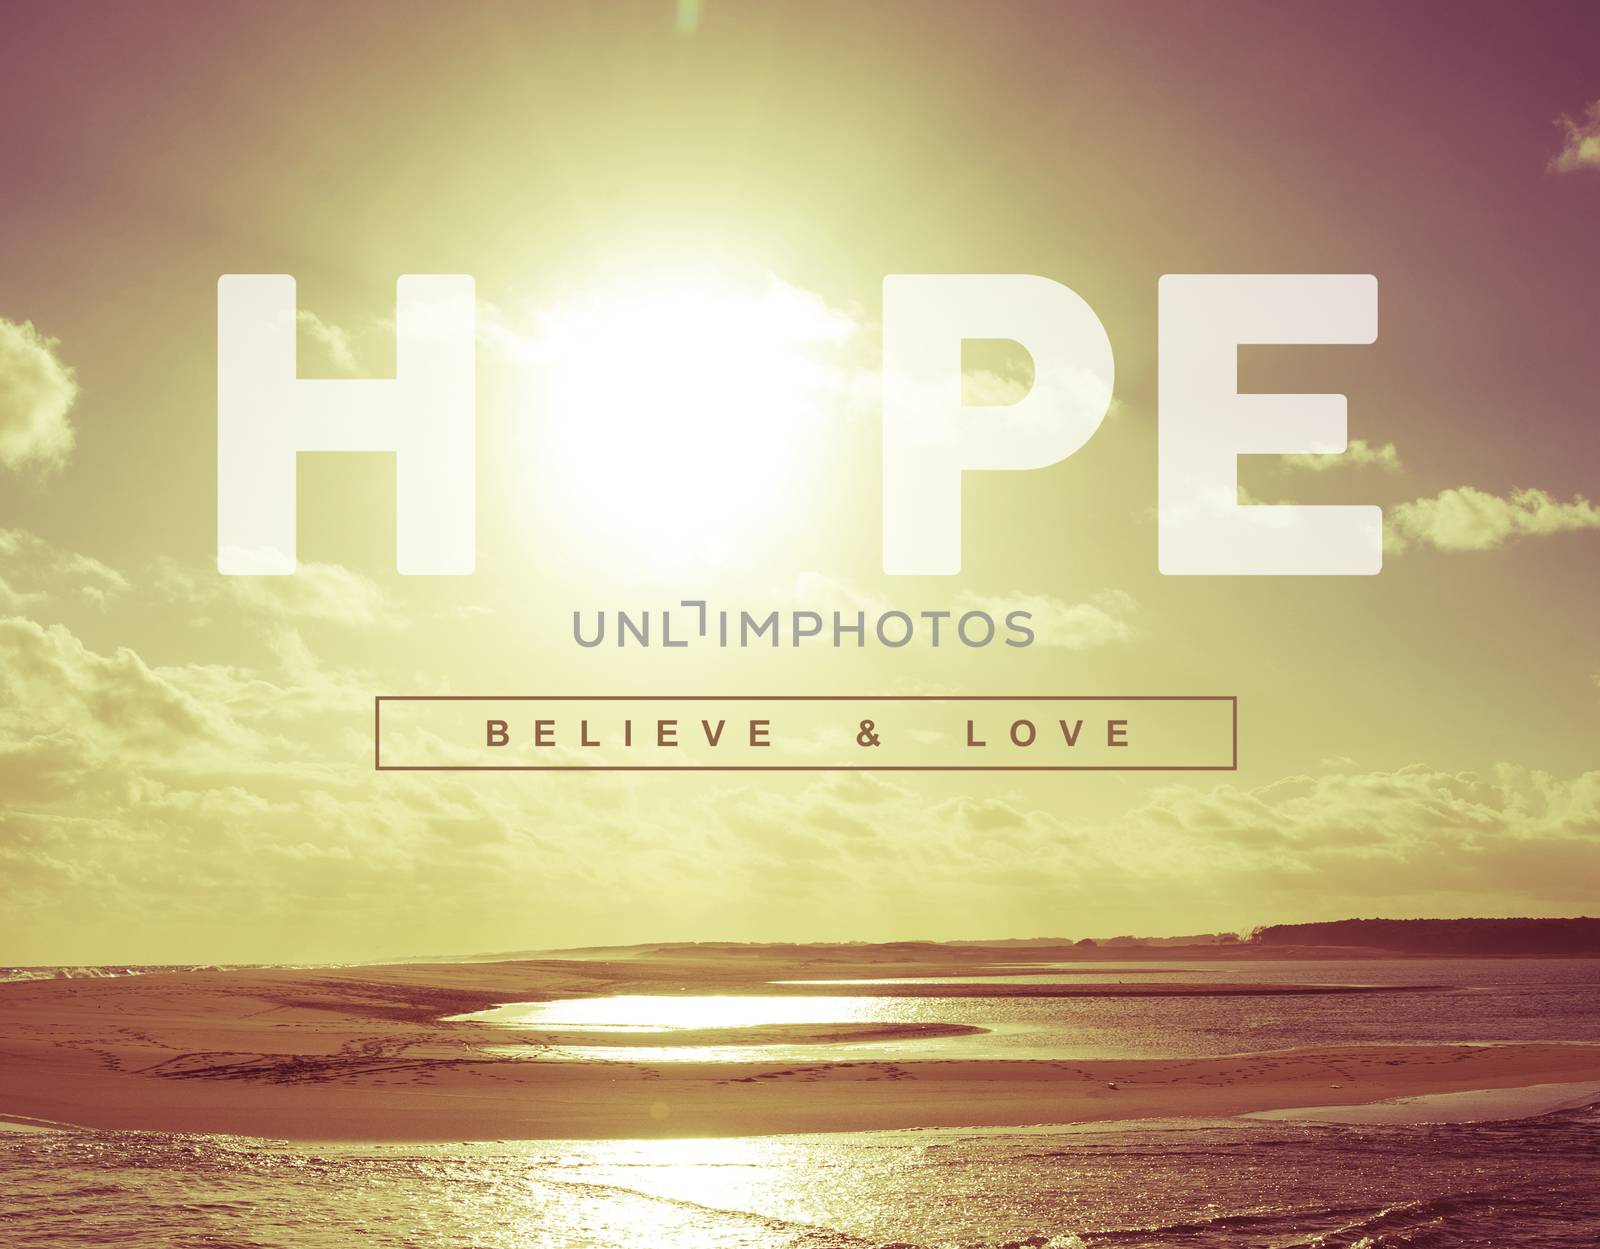 Hope believe and love motivational inspiring quote concept with vintage soft light sunset landscape background ideal for greeting card and poster design.